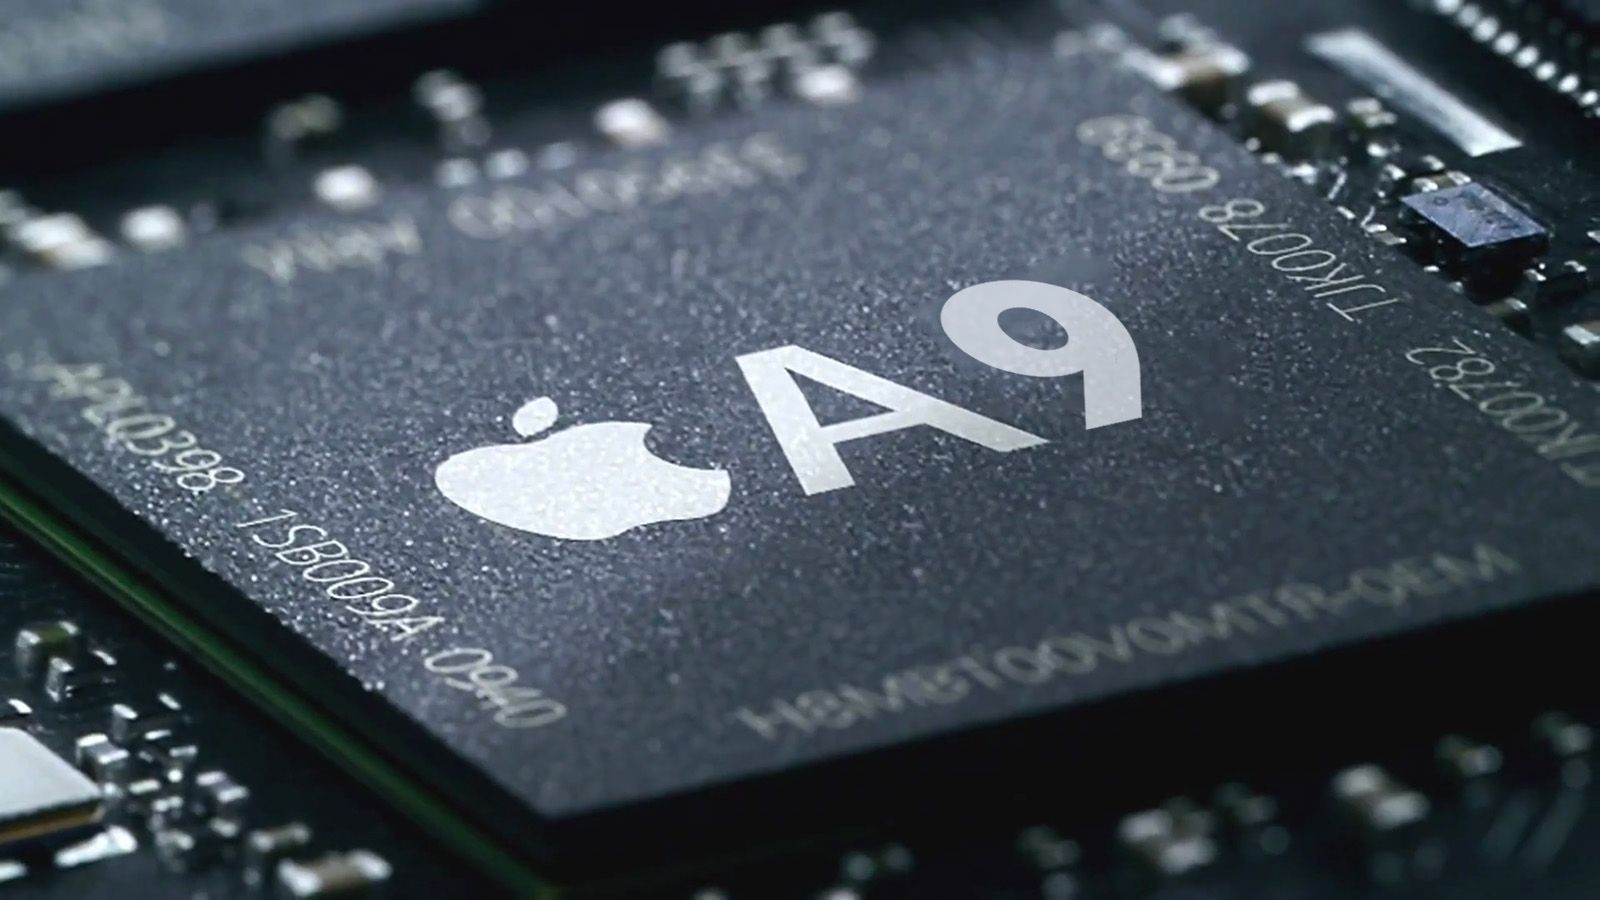 iphone 6s is go samsung starts manufacture of apple s a9 chip image 1